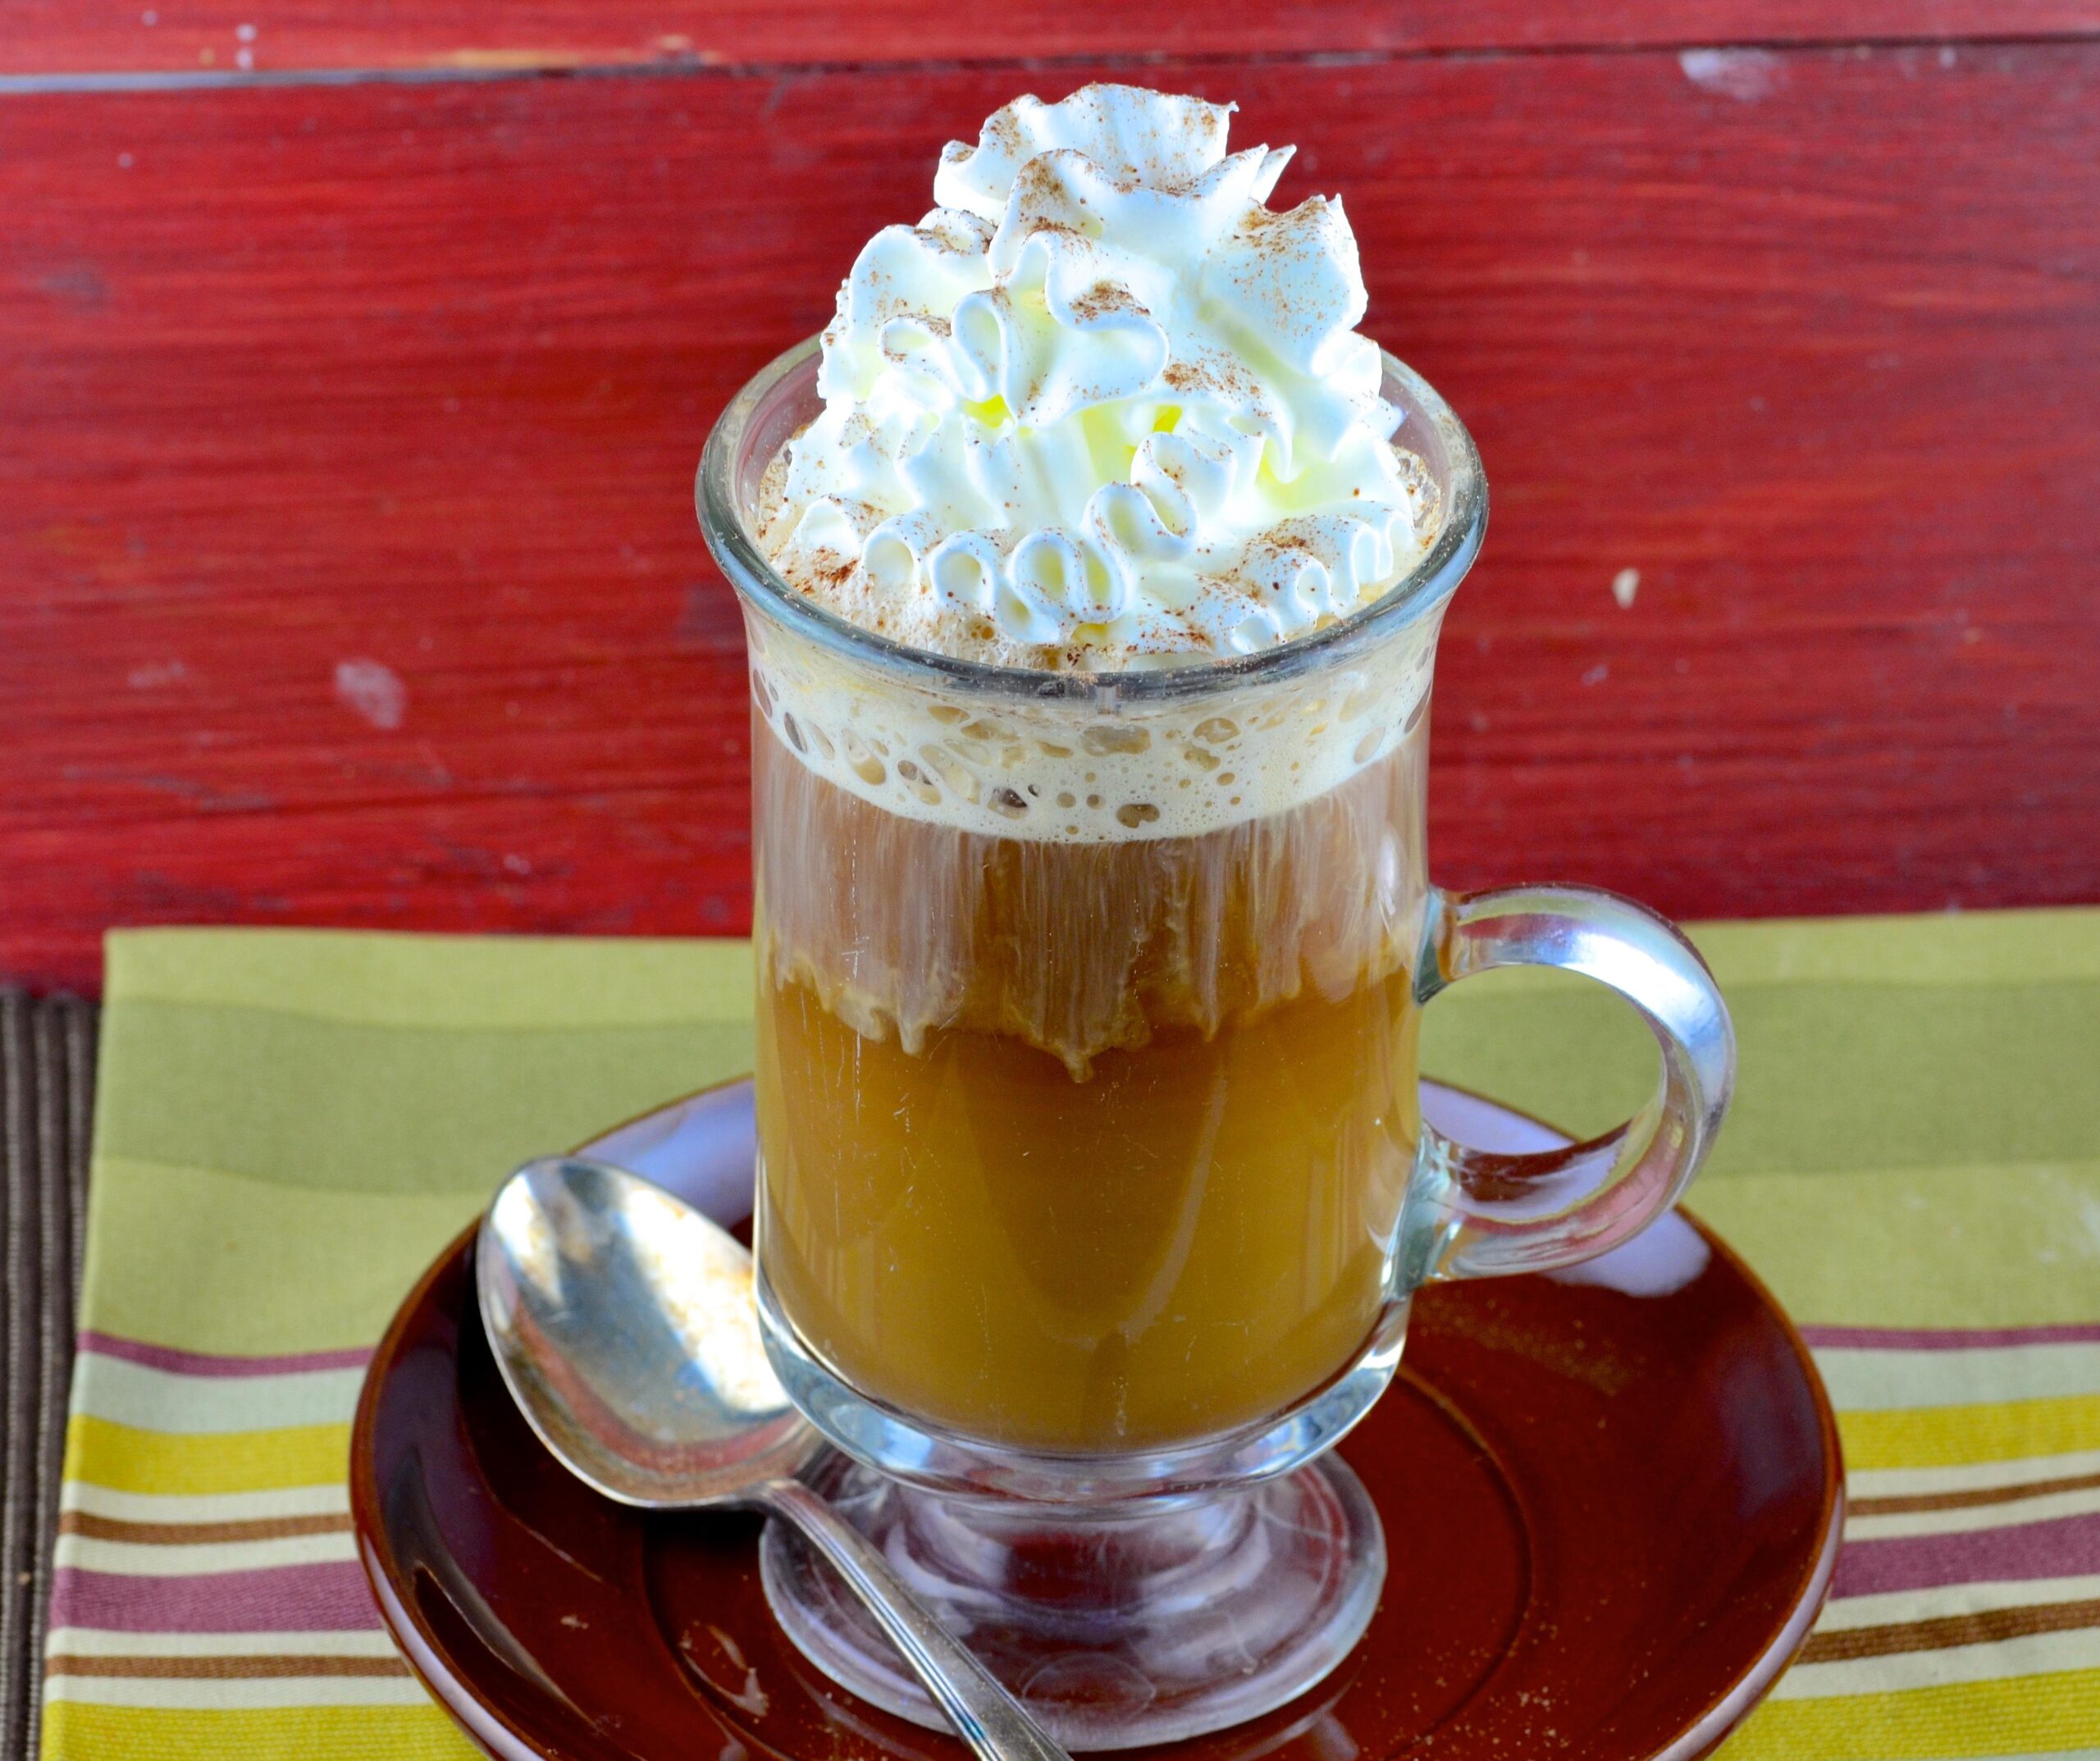  A soothing cup of Irish Coffee to warm up your cold winter nights!